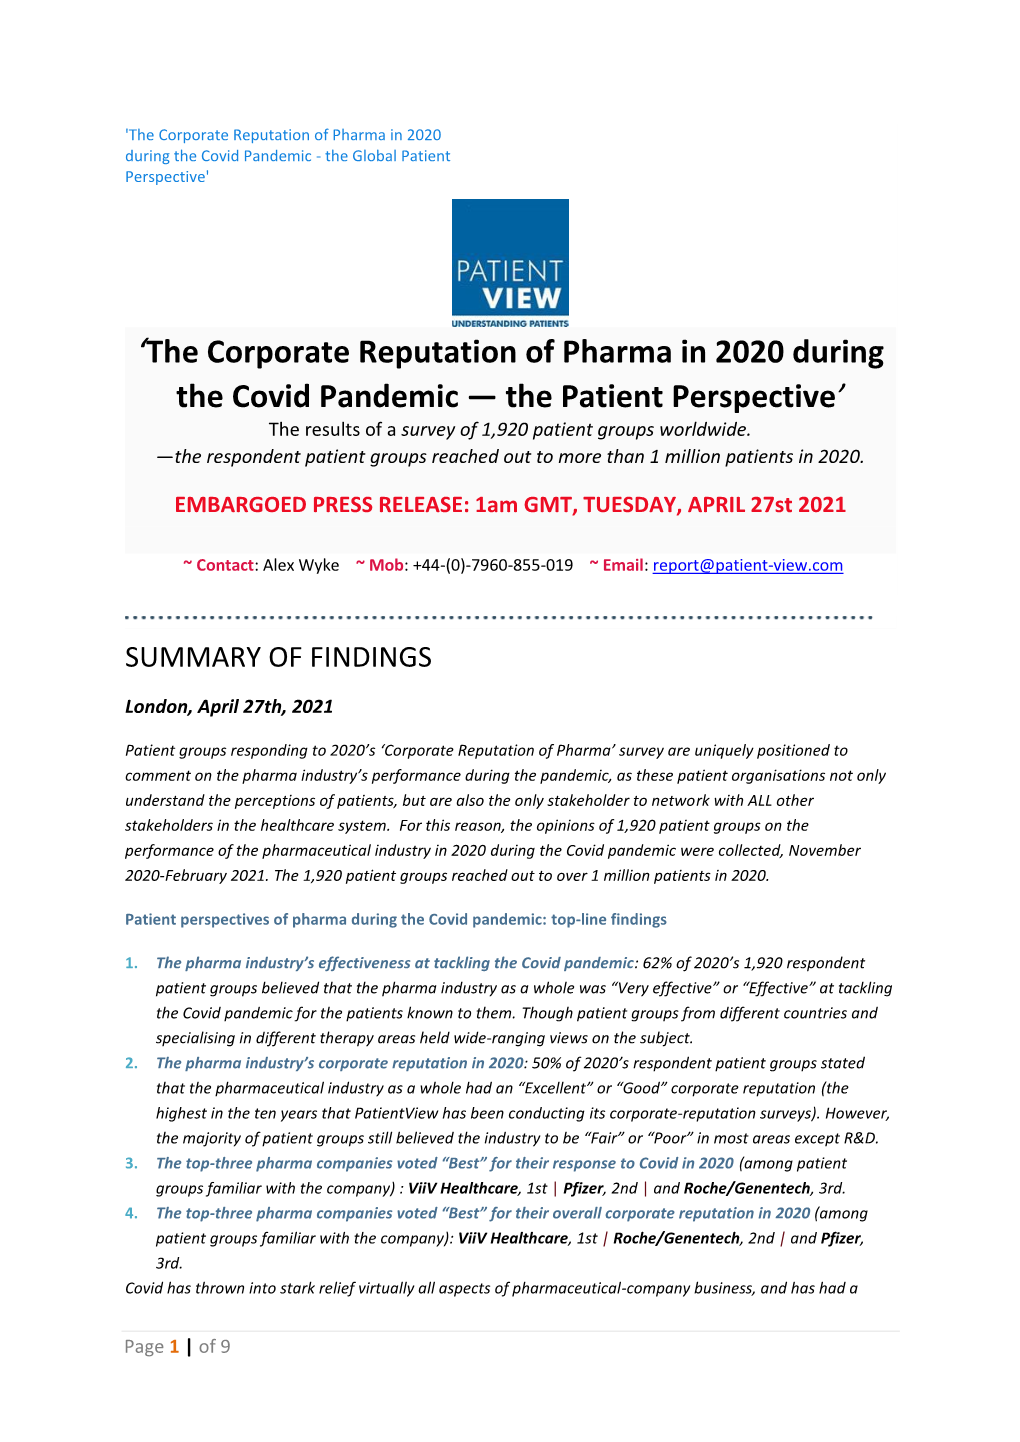 The Corporate Reputation of Pharma in 2020 During the Covid Pandemic - the Global Patient Perspective'